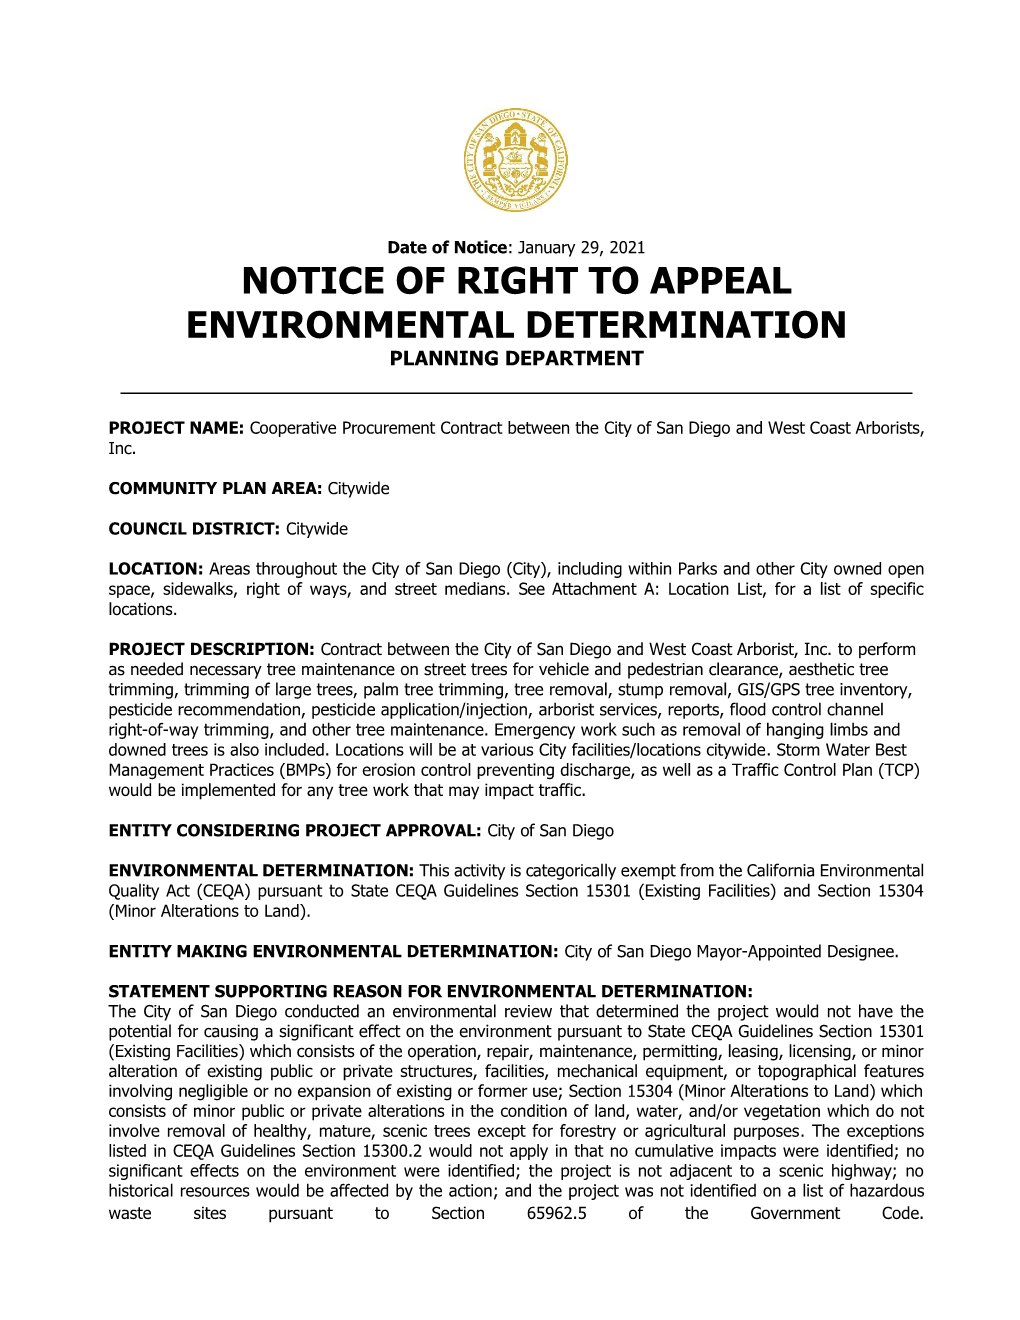 Notice of Right to Appeal Environmental Determination Planning Department